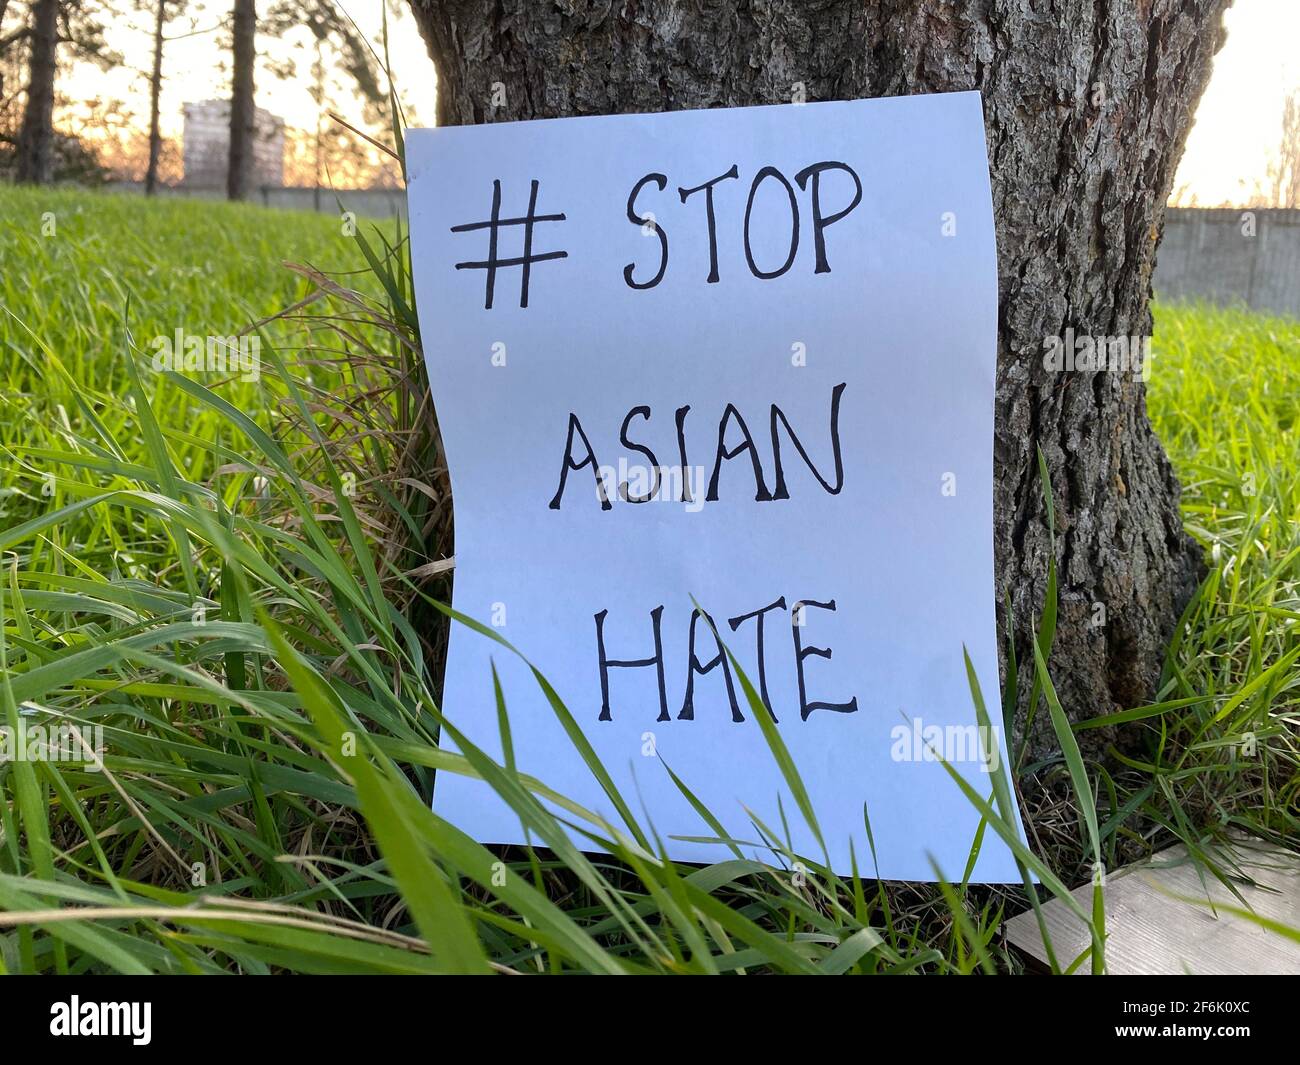 Stop Asian Hate, says the sign at the bottom of a tree. Show solidarity to all Asians suffering from racism. Asian Lives Matter movement protest. Stock Photo